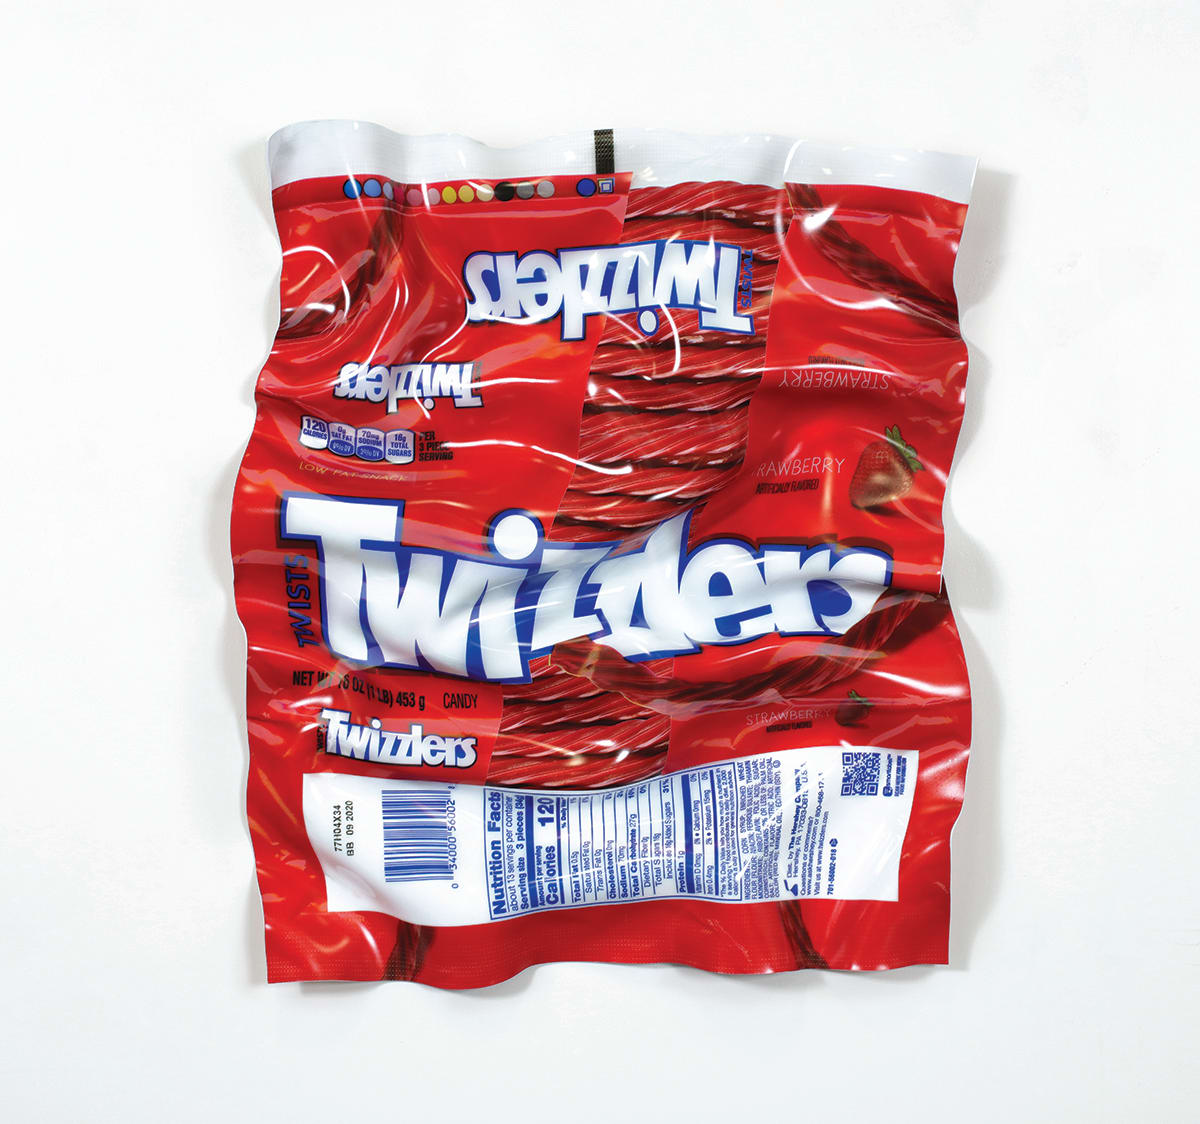 Paul Rousso - gallery - Candy Wrappers